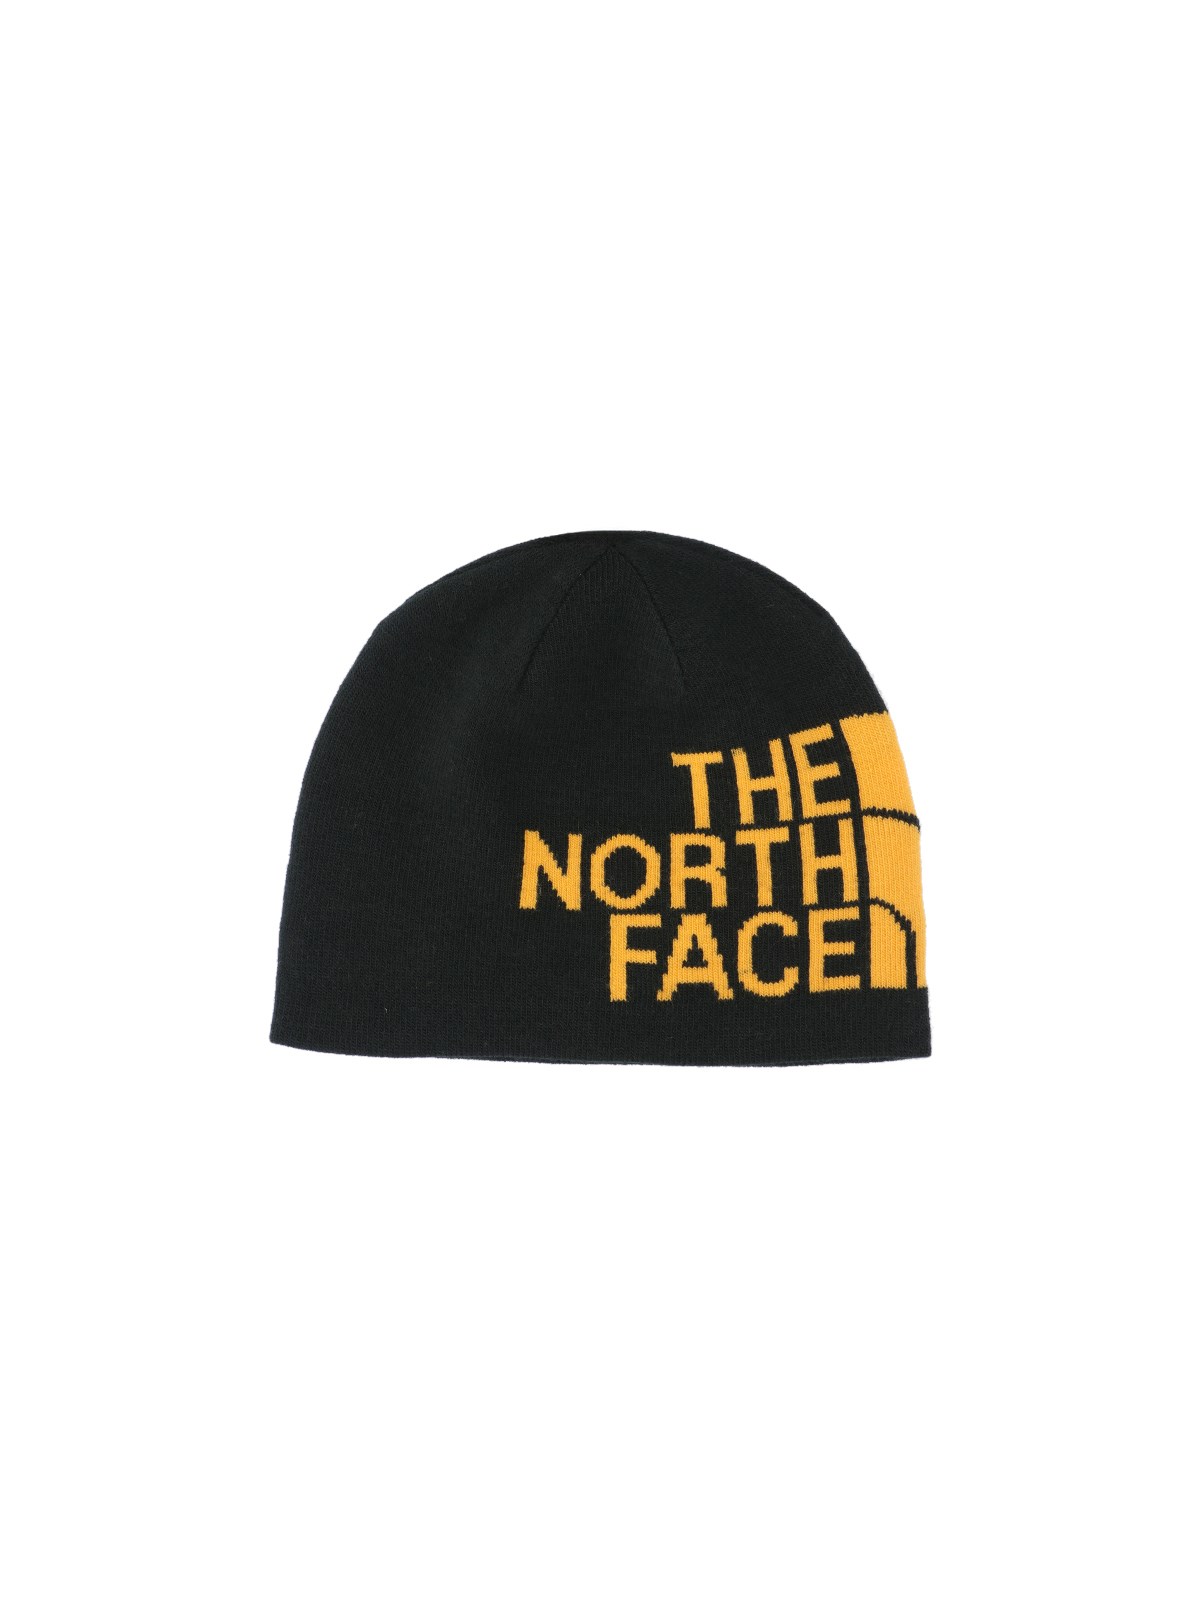 The North Face Reversible Banner Beanie Hat In Black,yellow